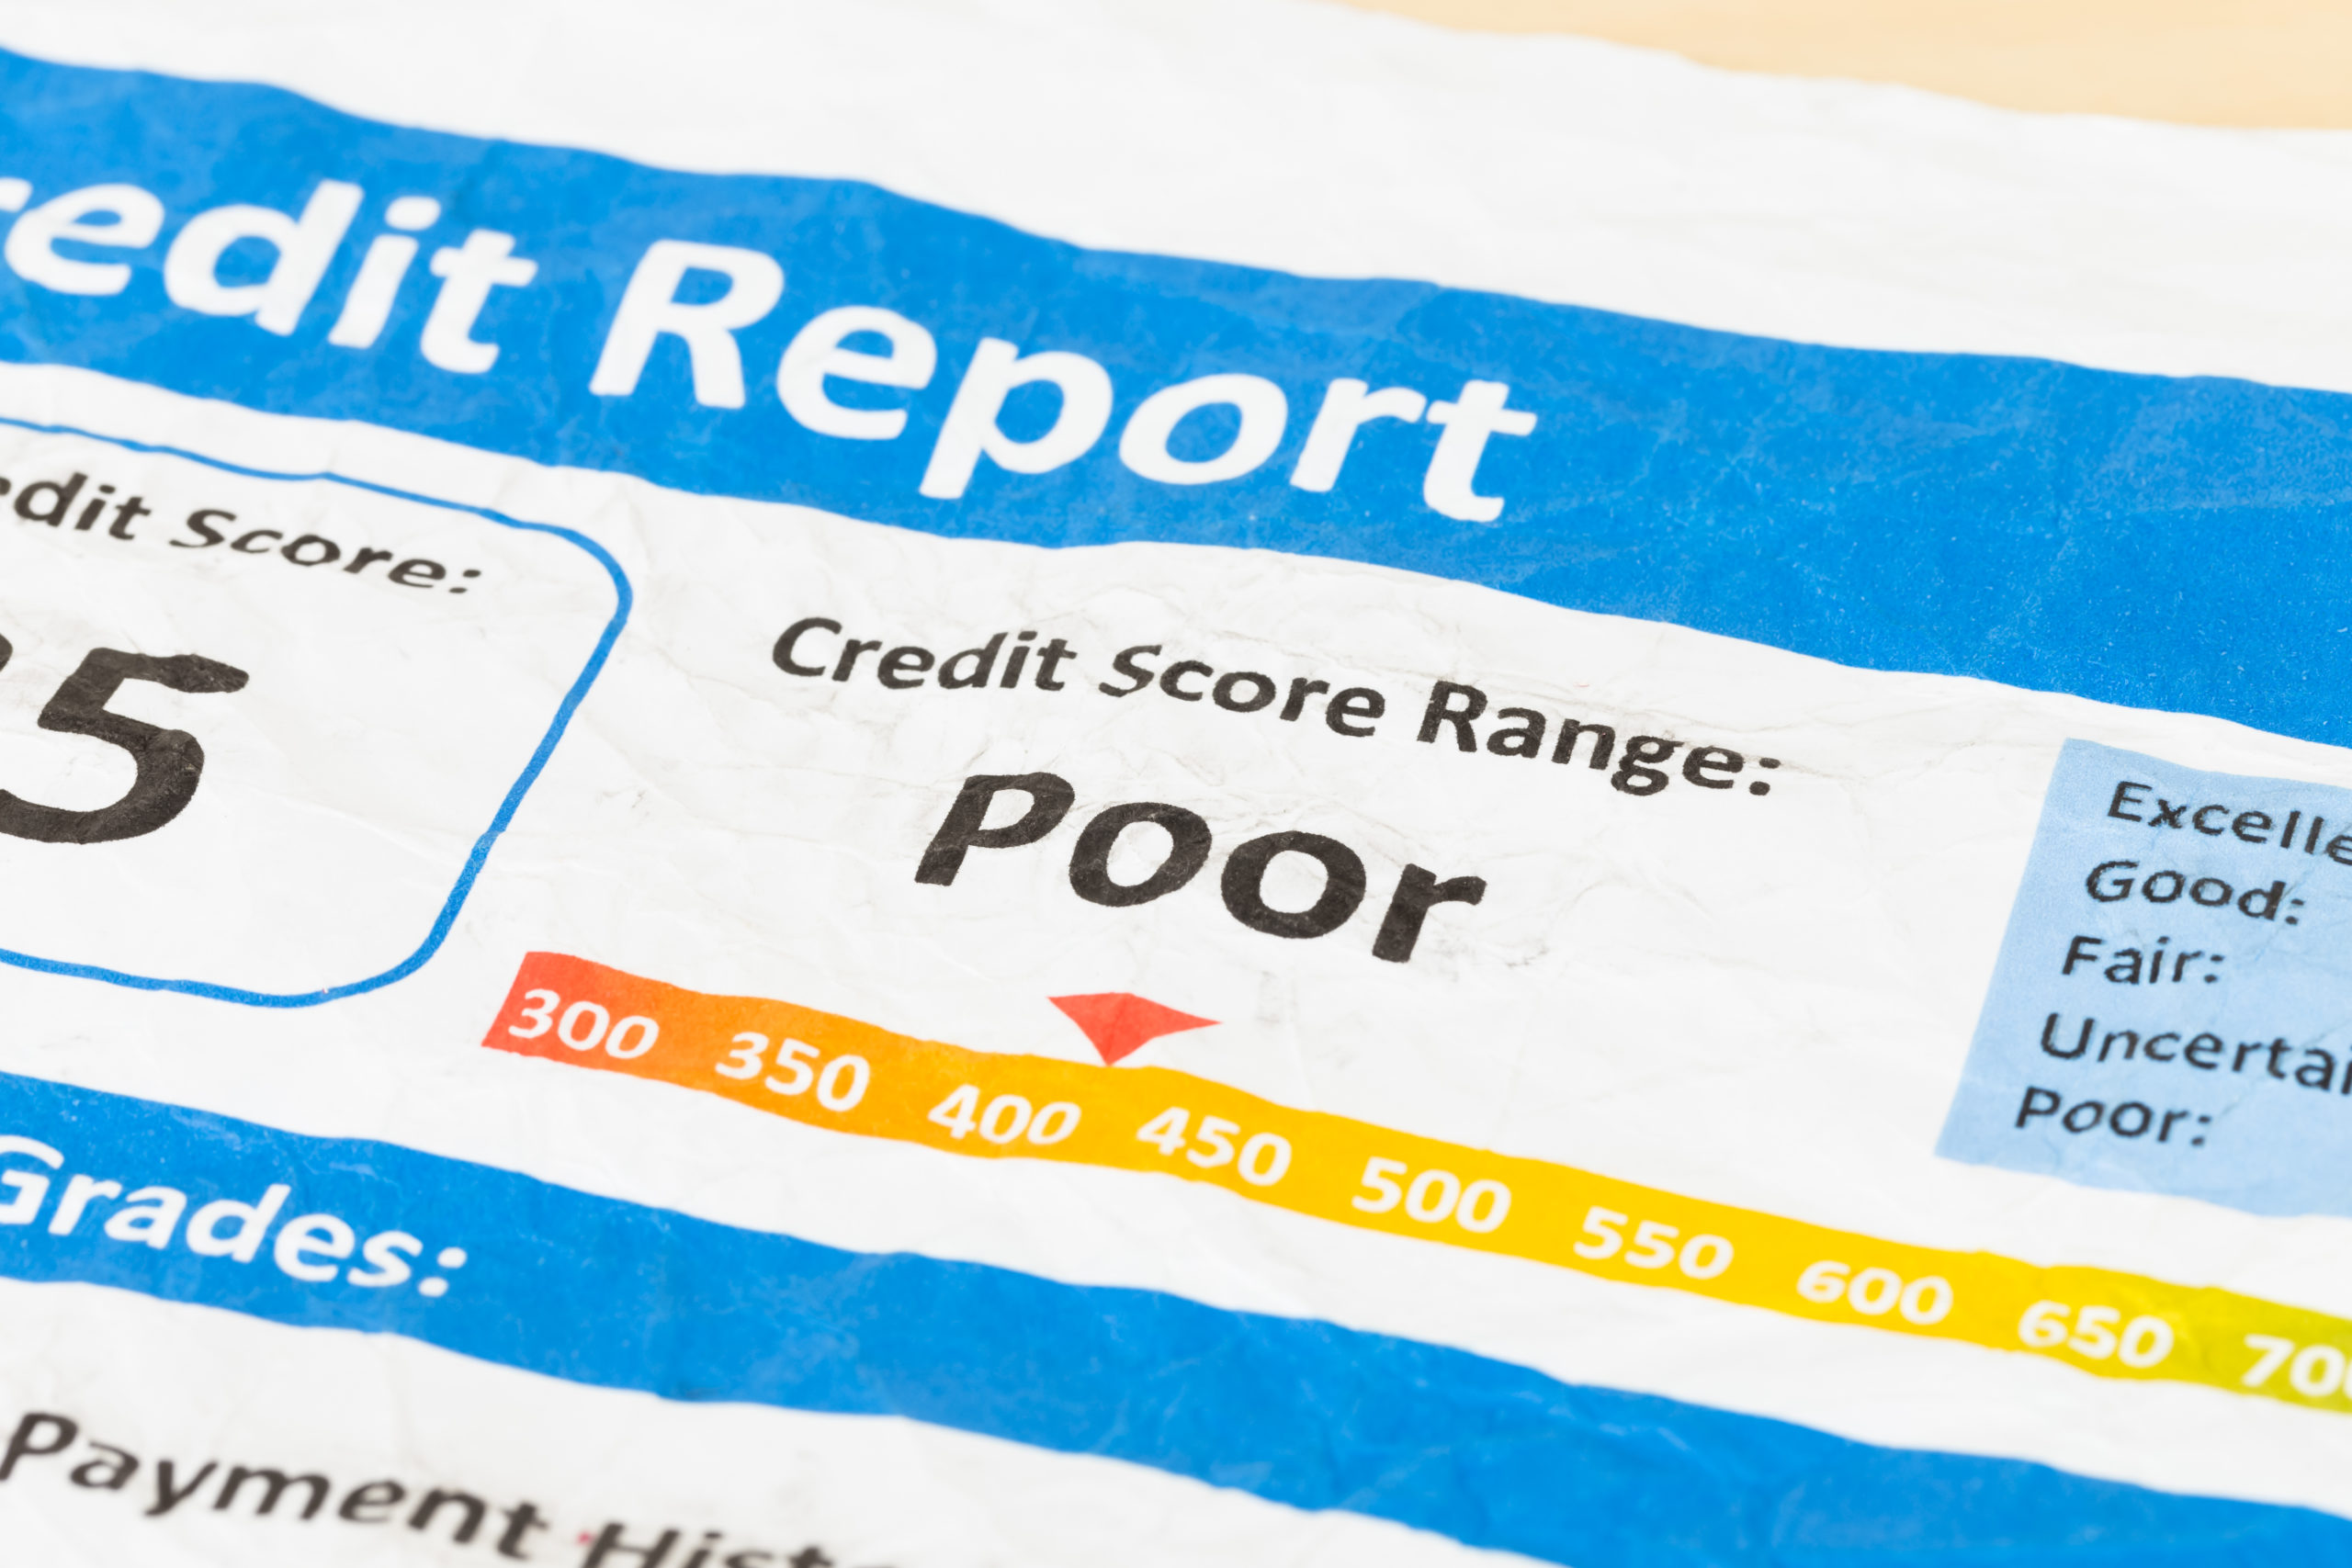 How To Fix A Bad Credit Score? - Square One Credit Management